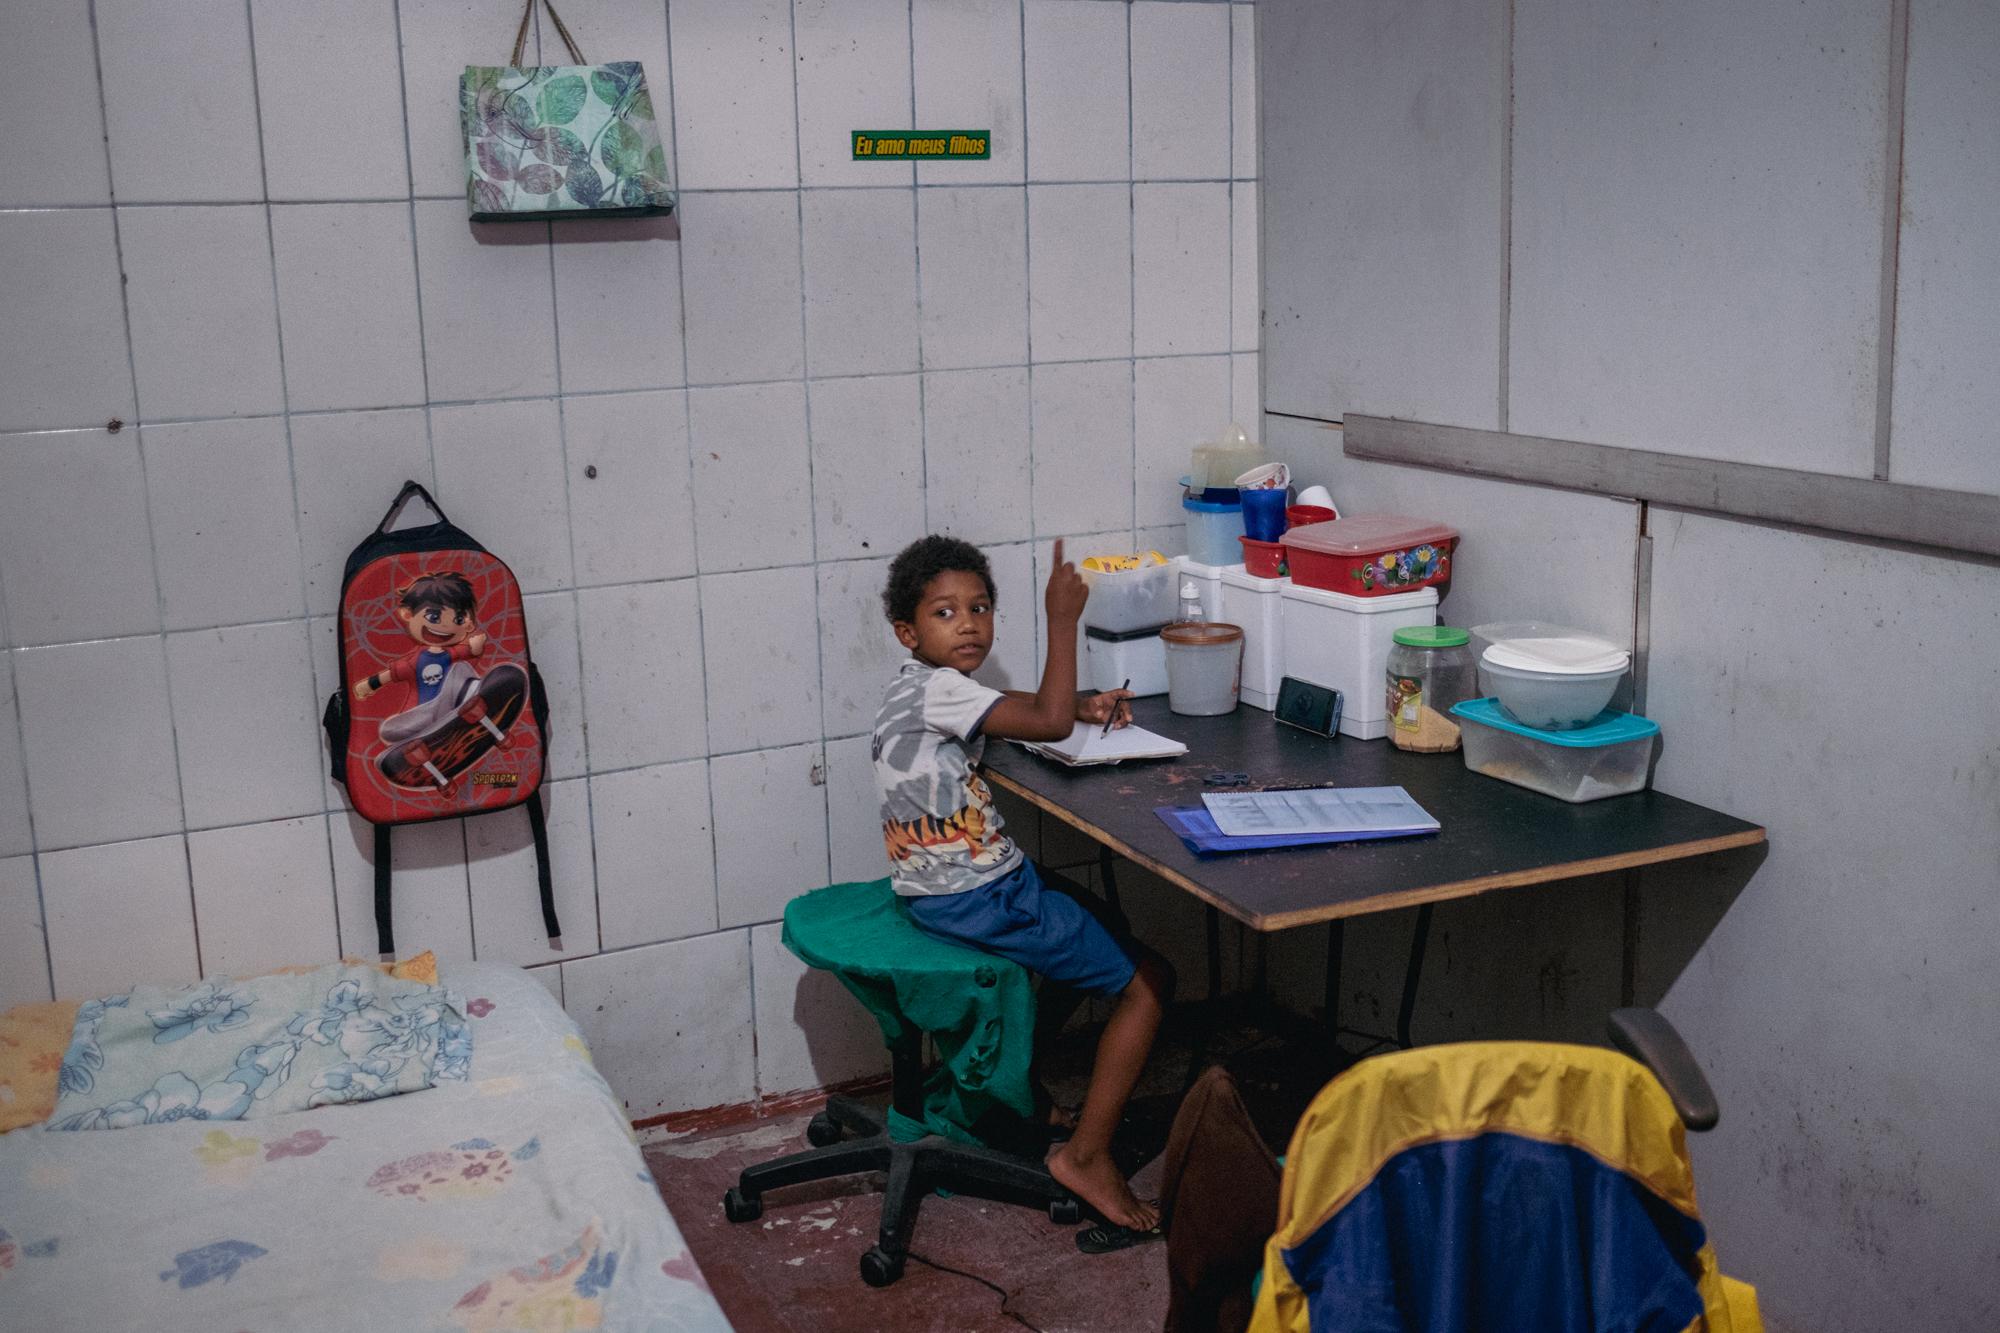 Nós por Nós - Alexandro, 8, studies on his mother's cellphone in...